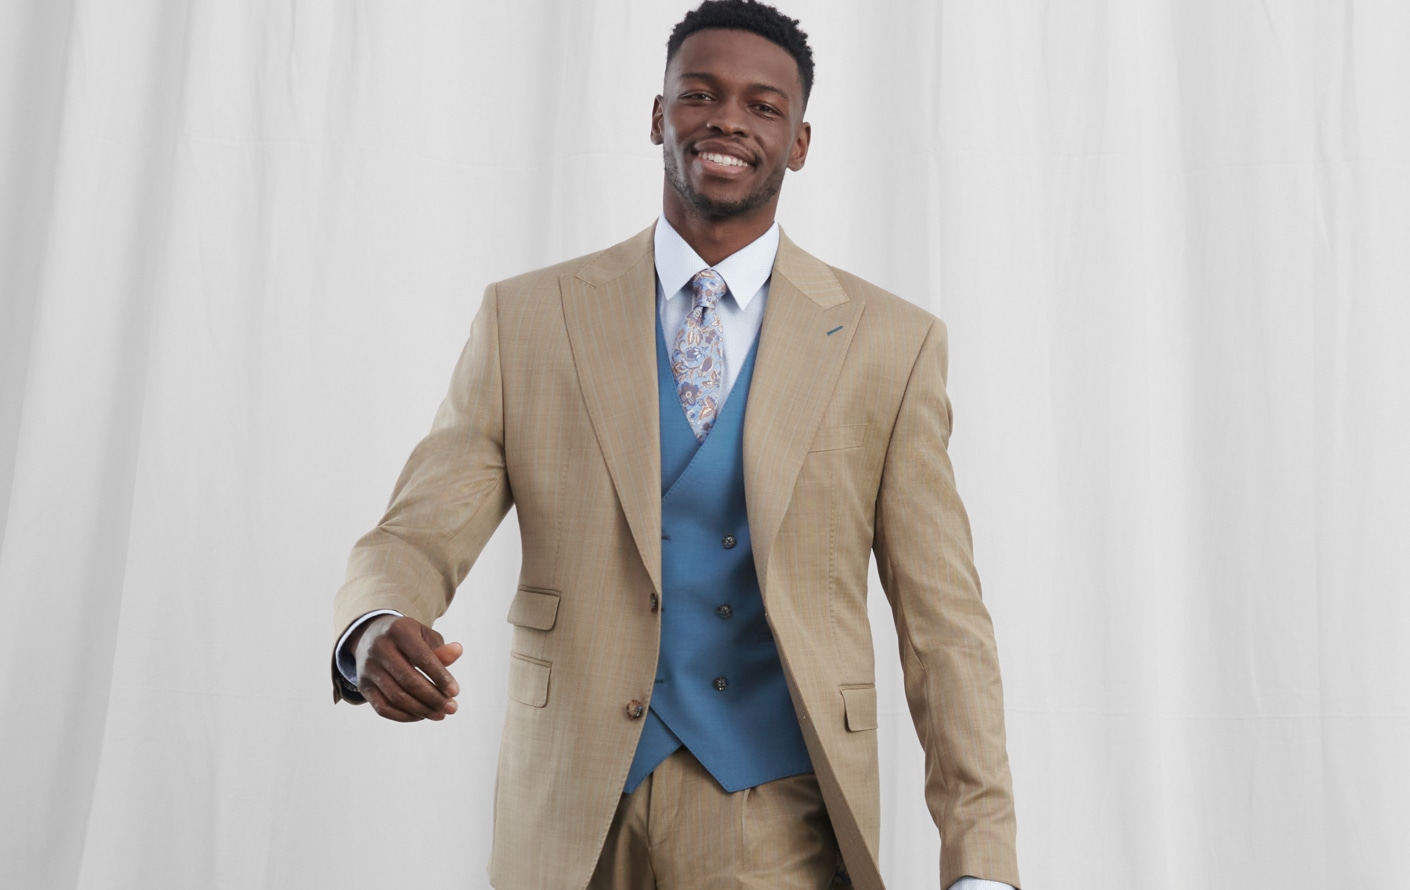 Shop Men's Clothing | Up To 80% Off | Men's Wearhouse